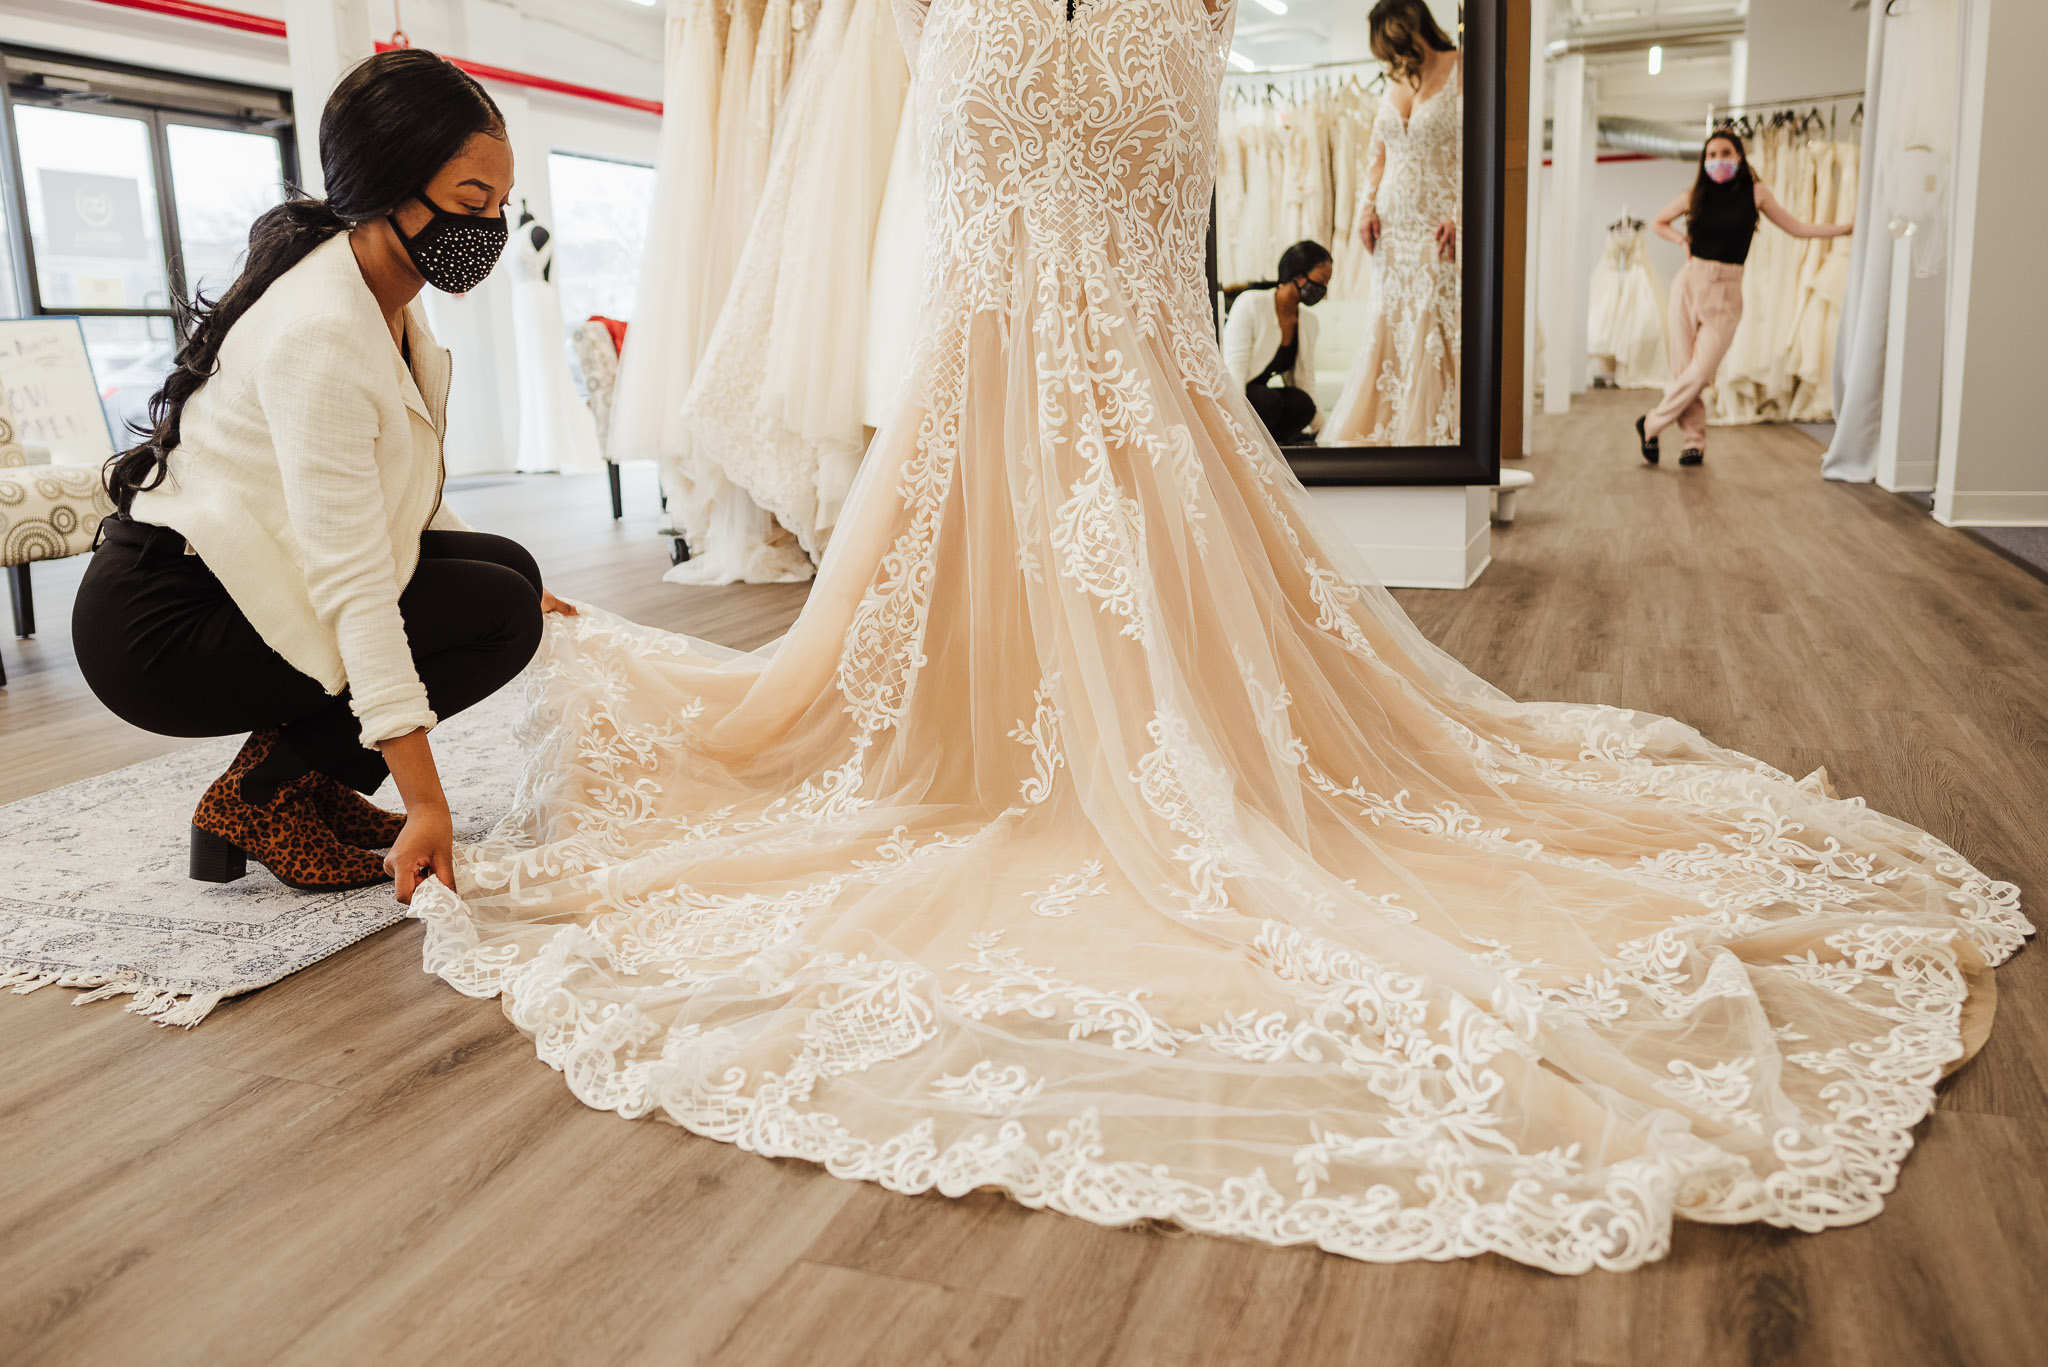 Wedding Dress Shopping: Everything You Need To Know (From a Bridal